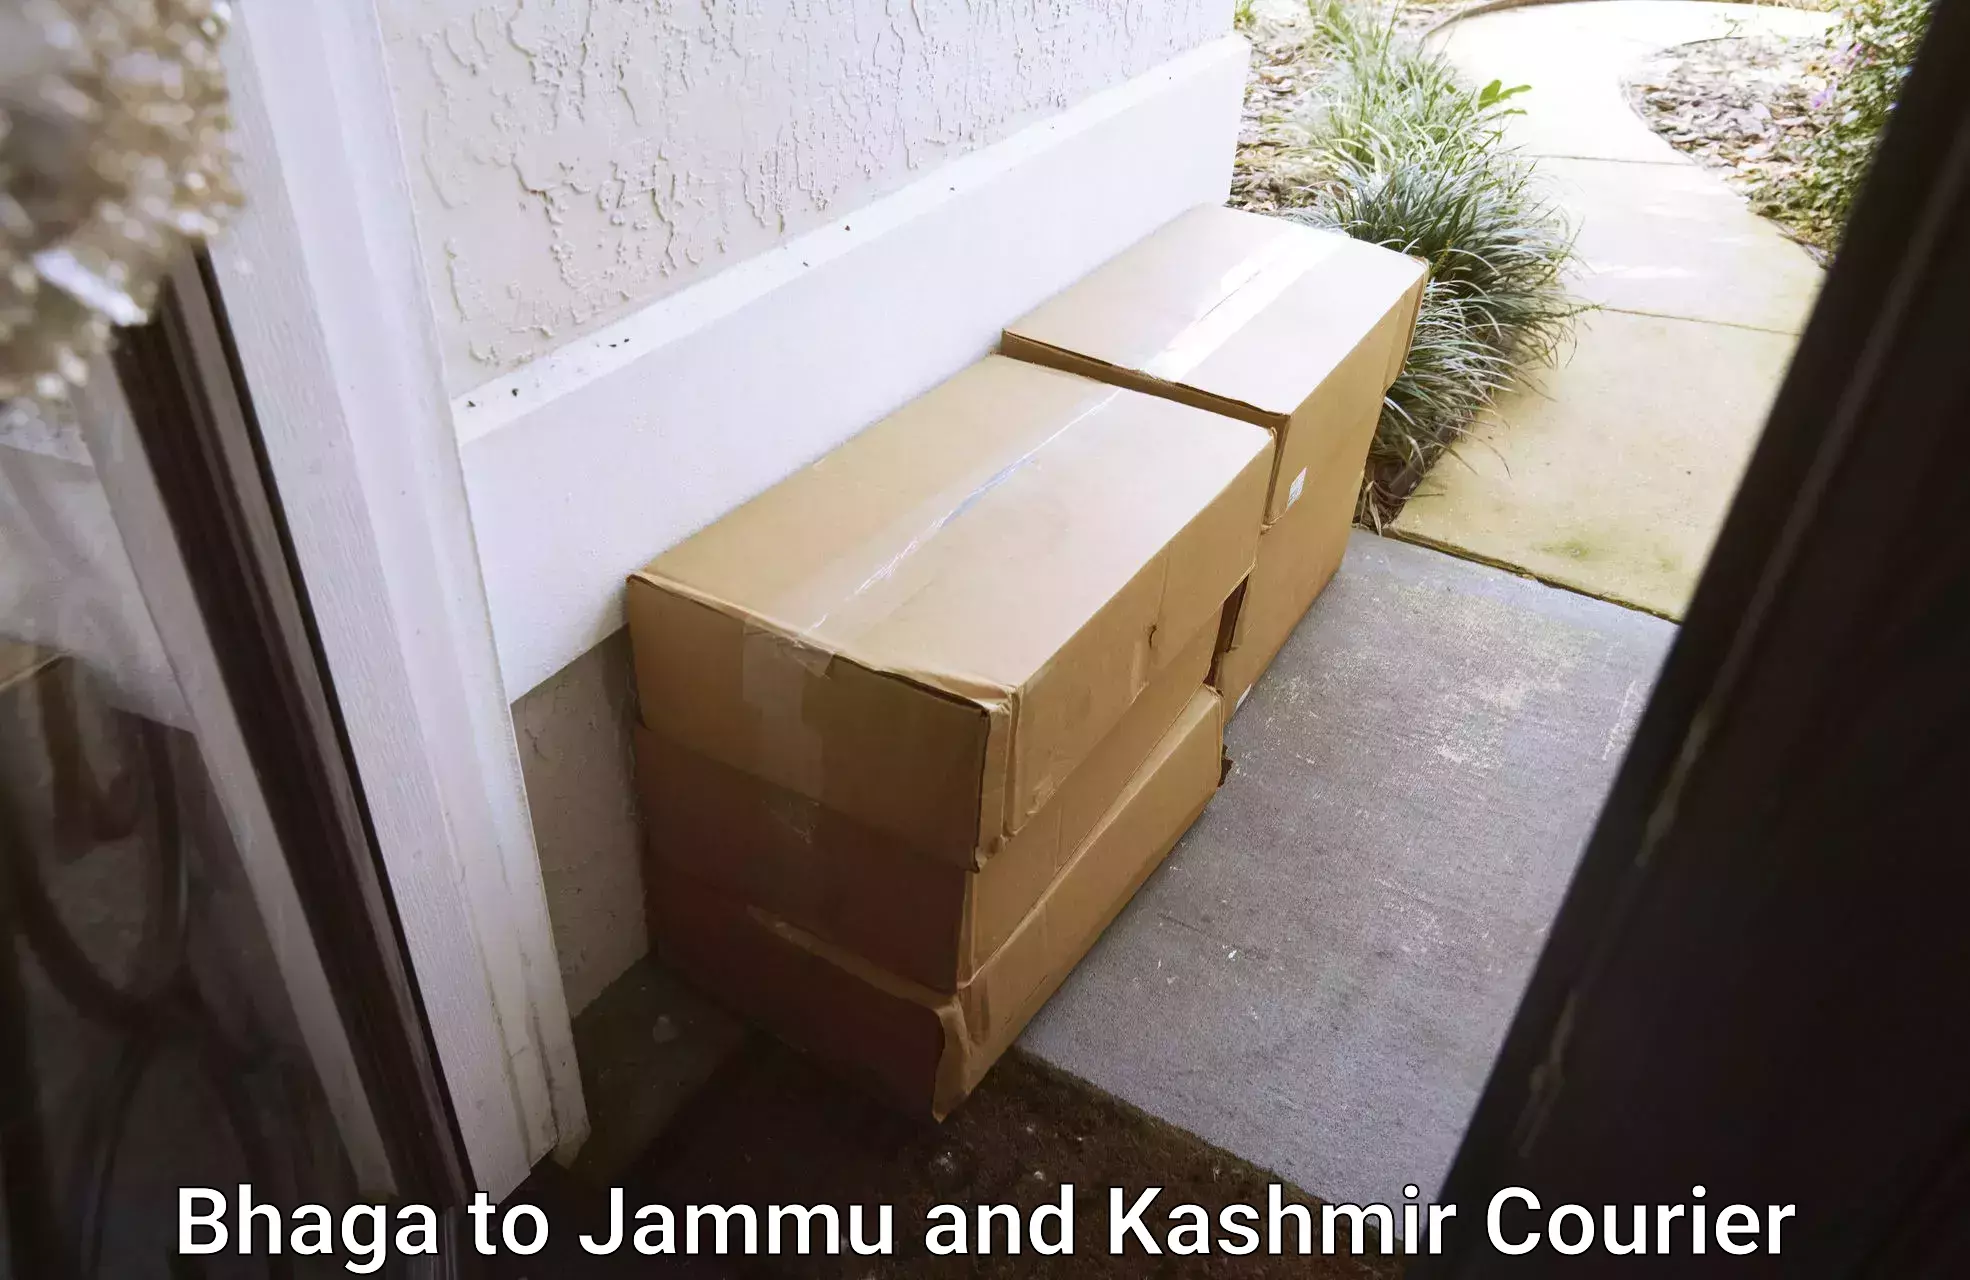 Flexible delivery schedules Bhaga to Budgam